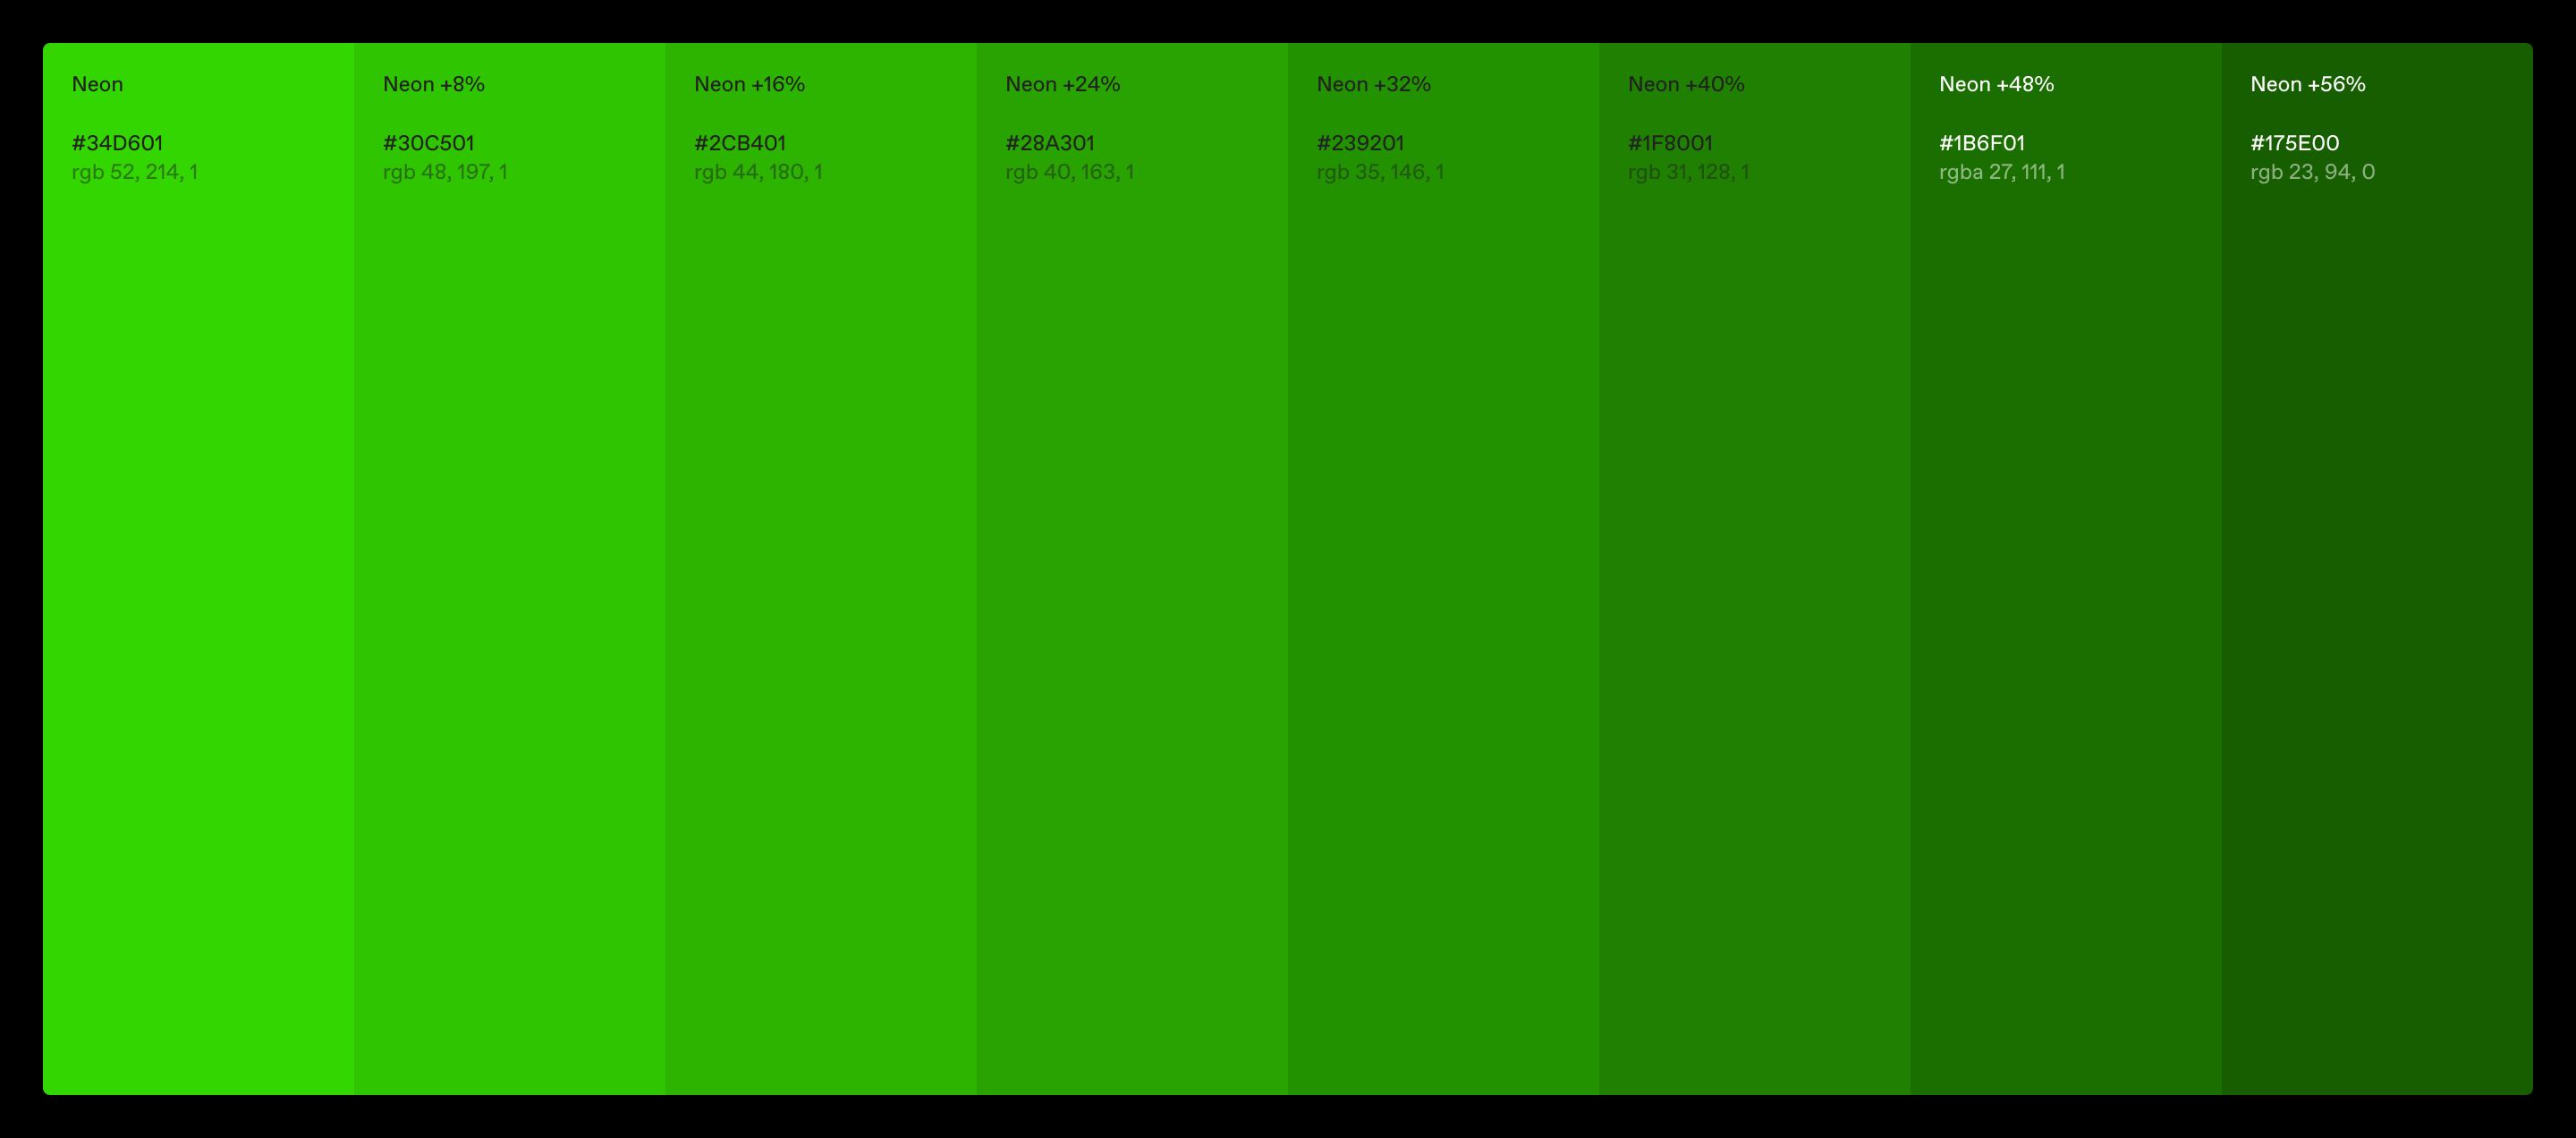 korr color palette made of shades of green